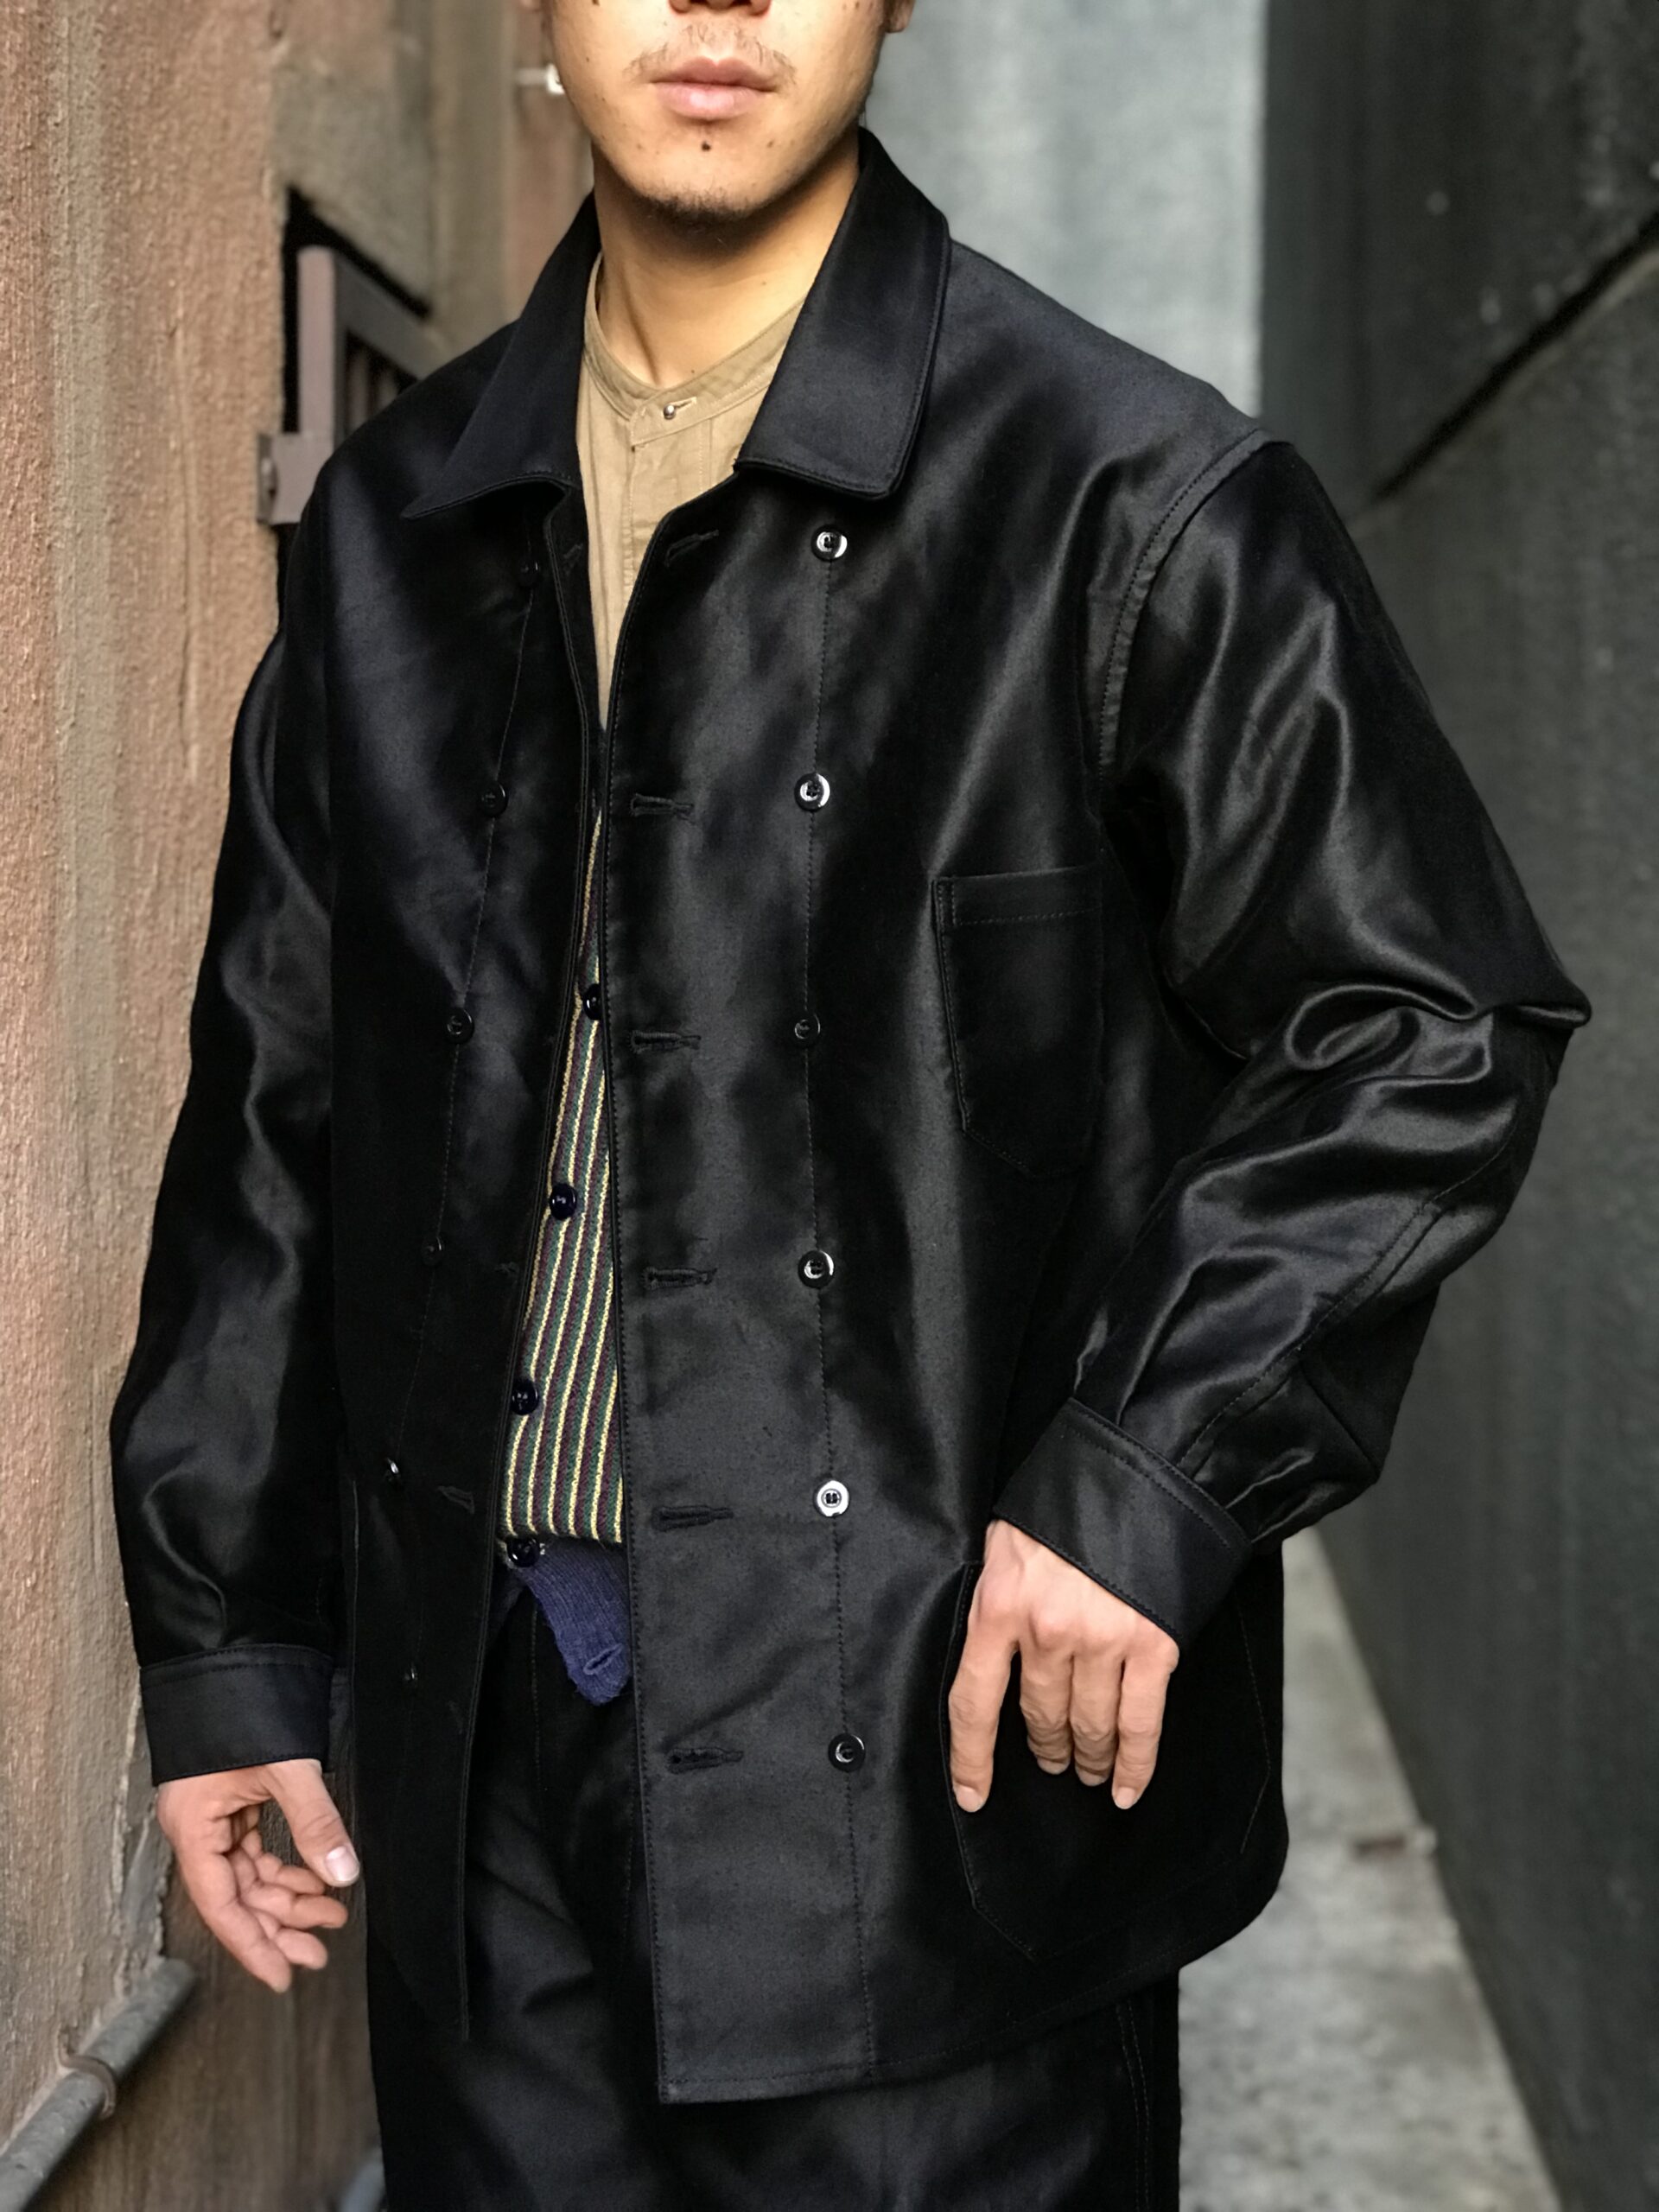 OUTIL 21AW ITEM INTRODUCTION | ARCH TOKYO